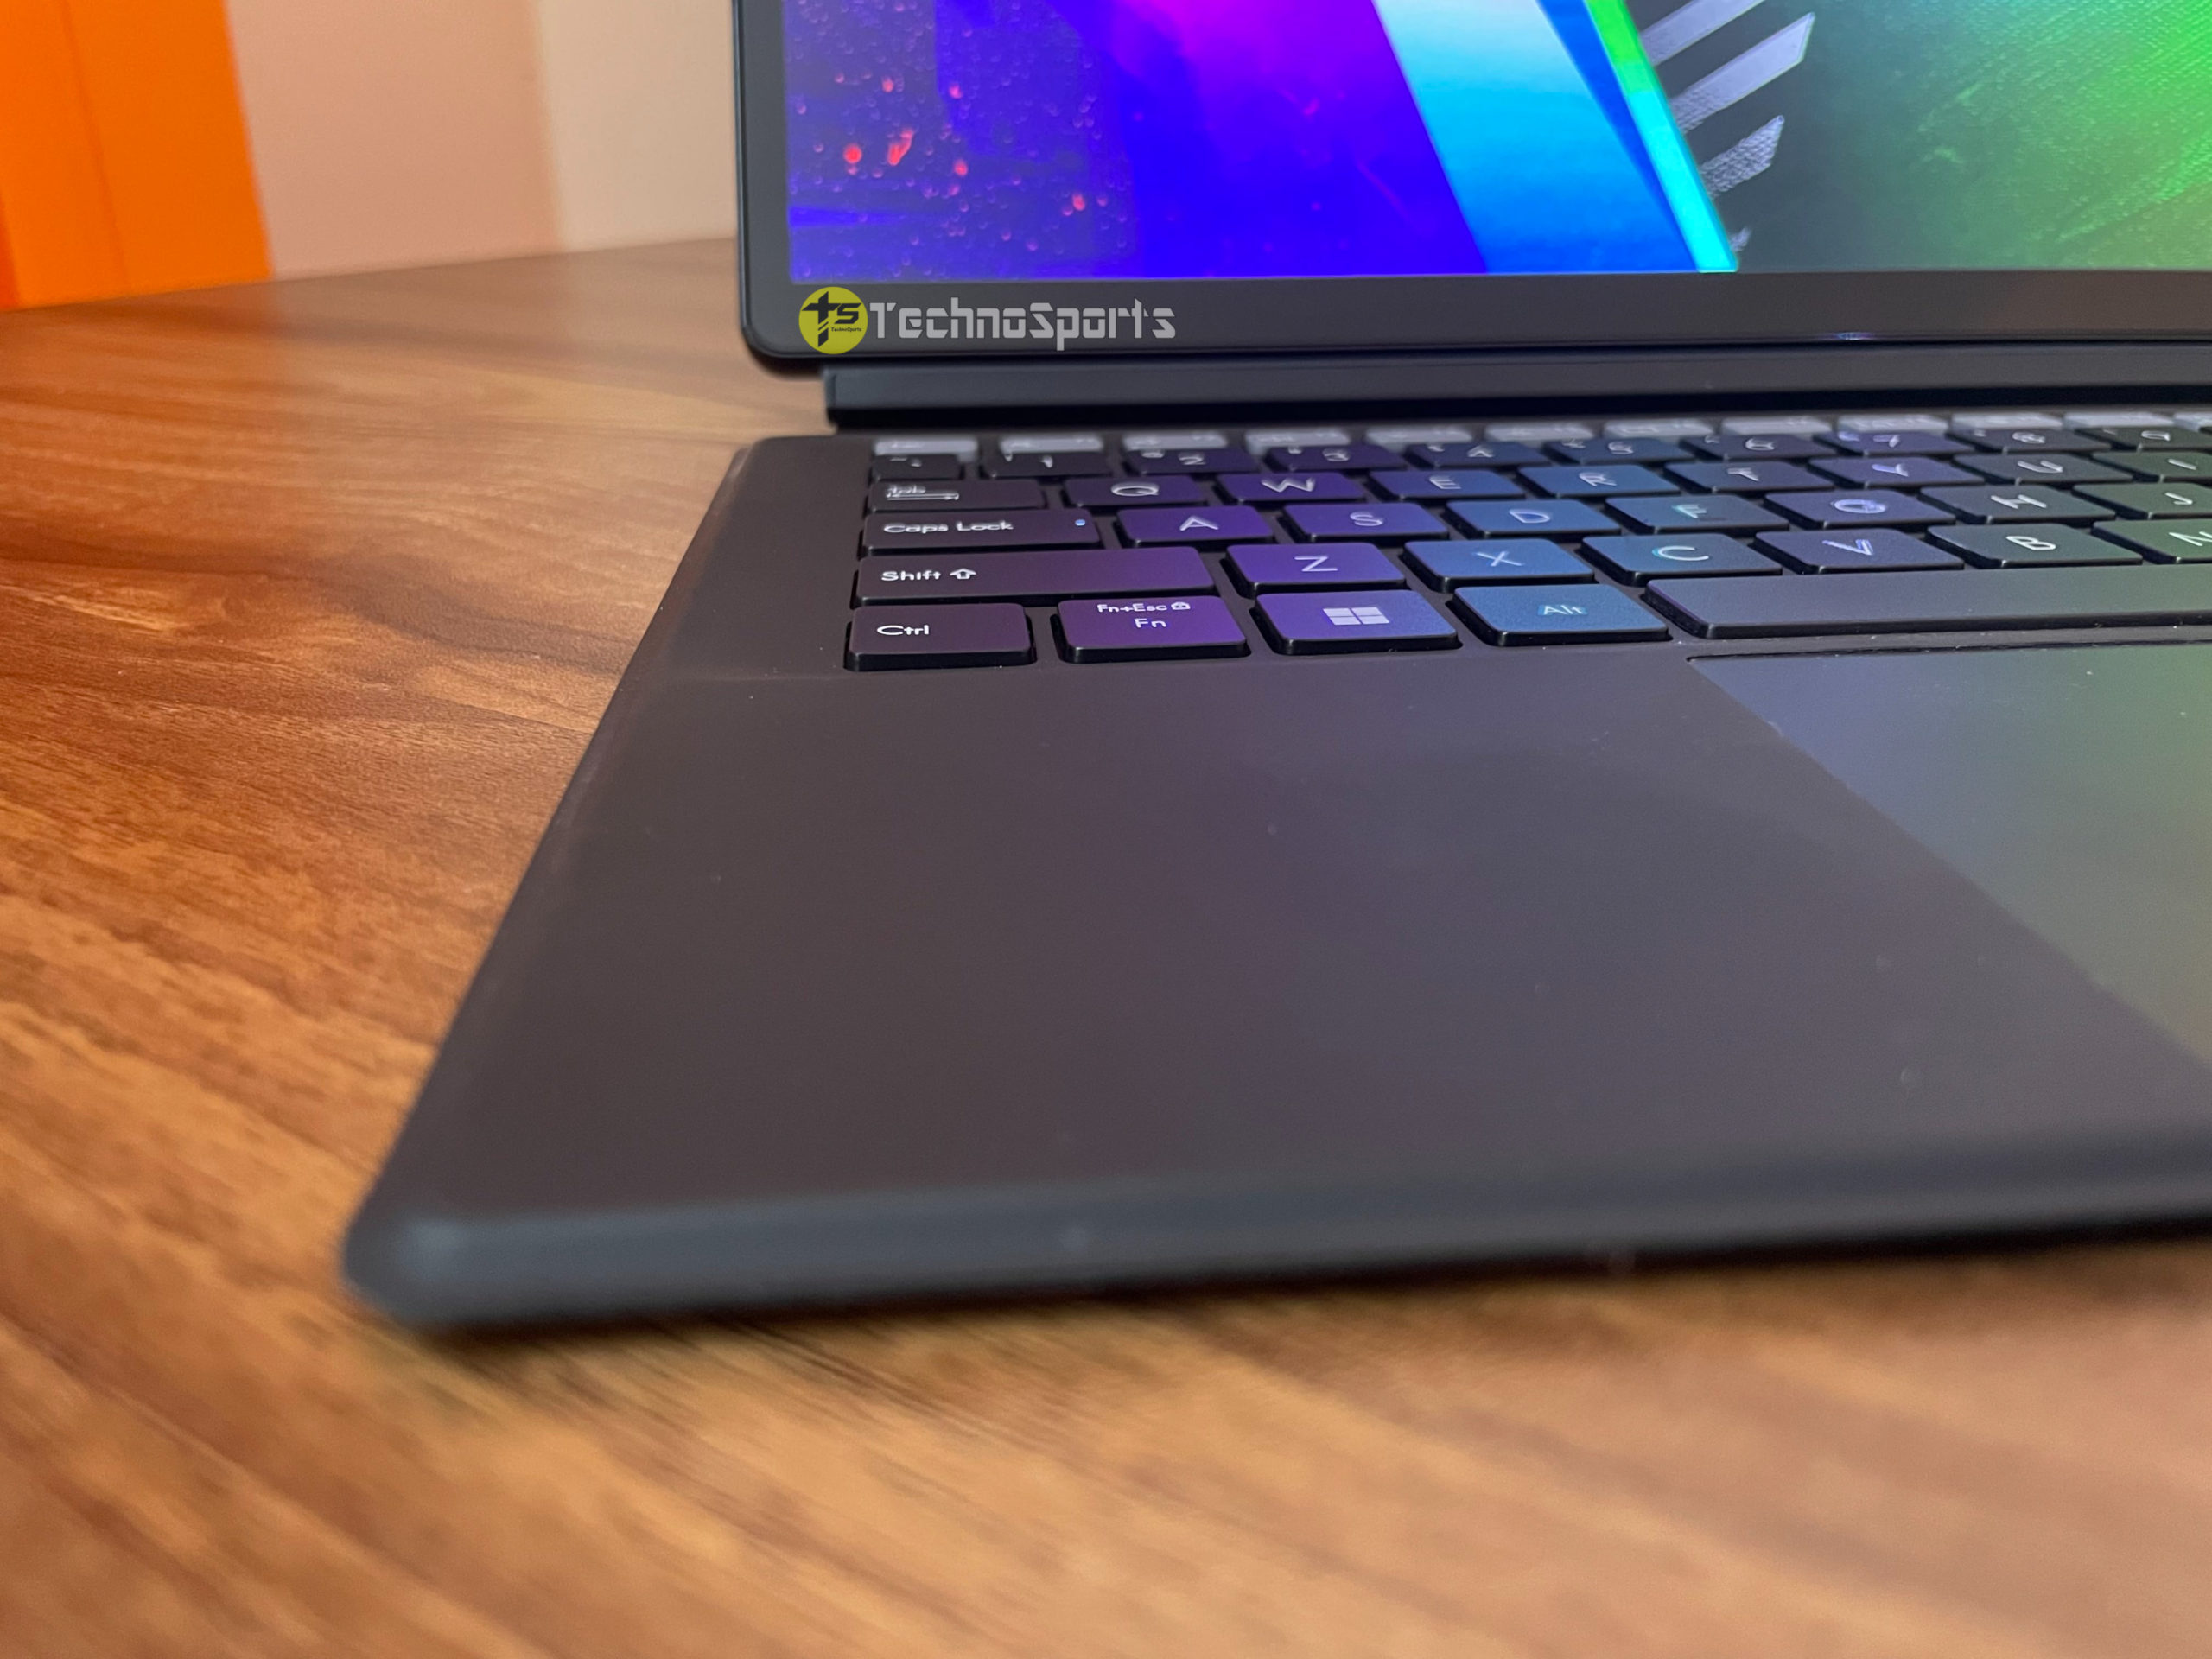 ASUS Vivobook 13 Slate OLED is promising, limited by the performance